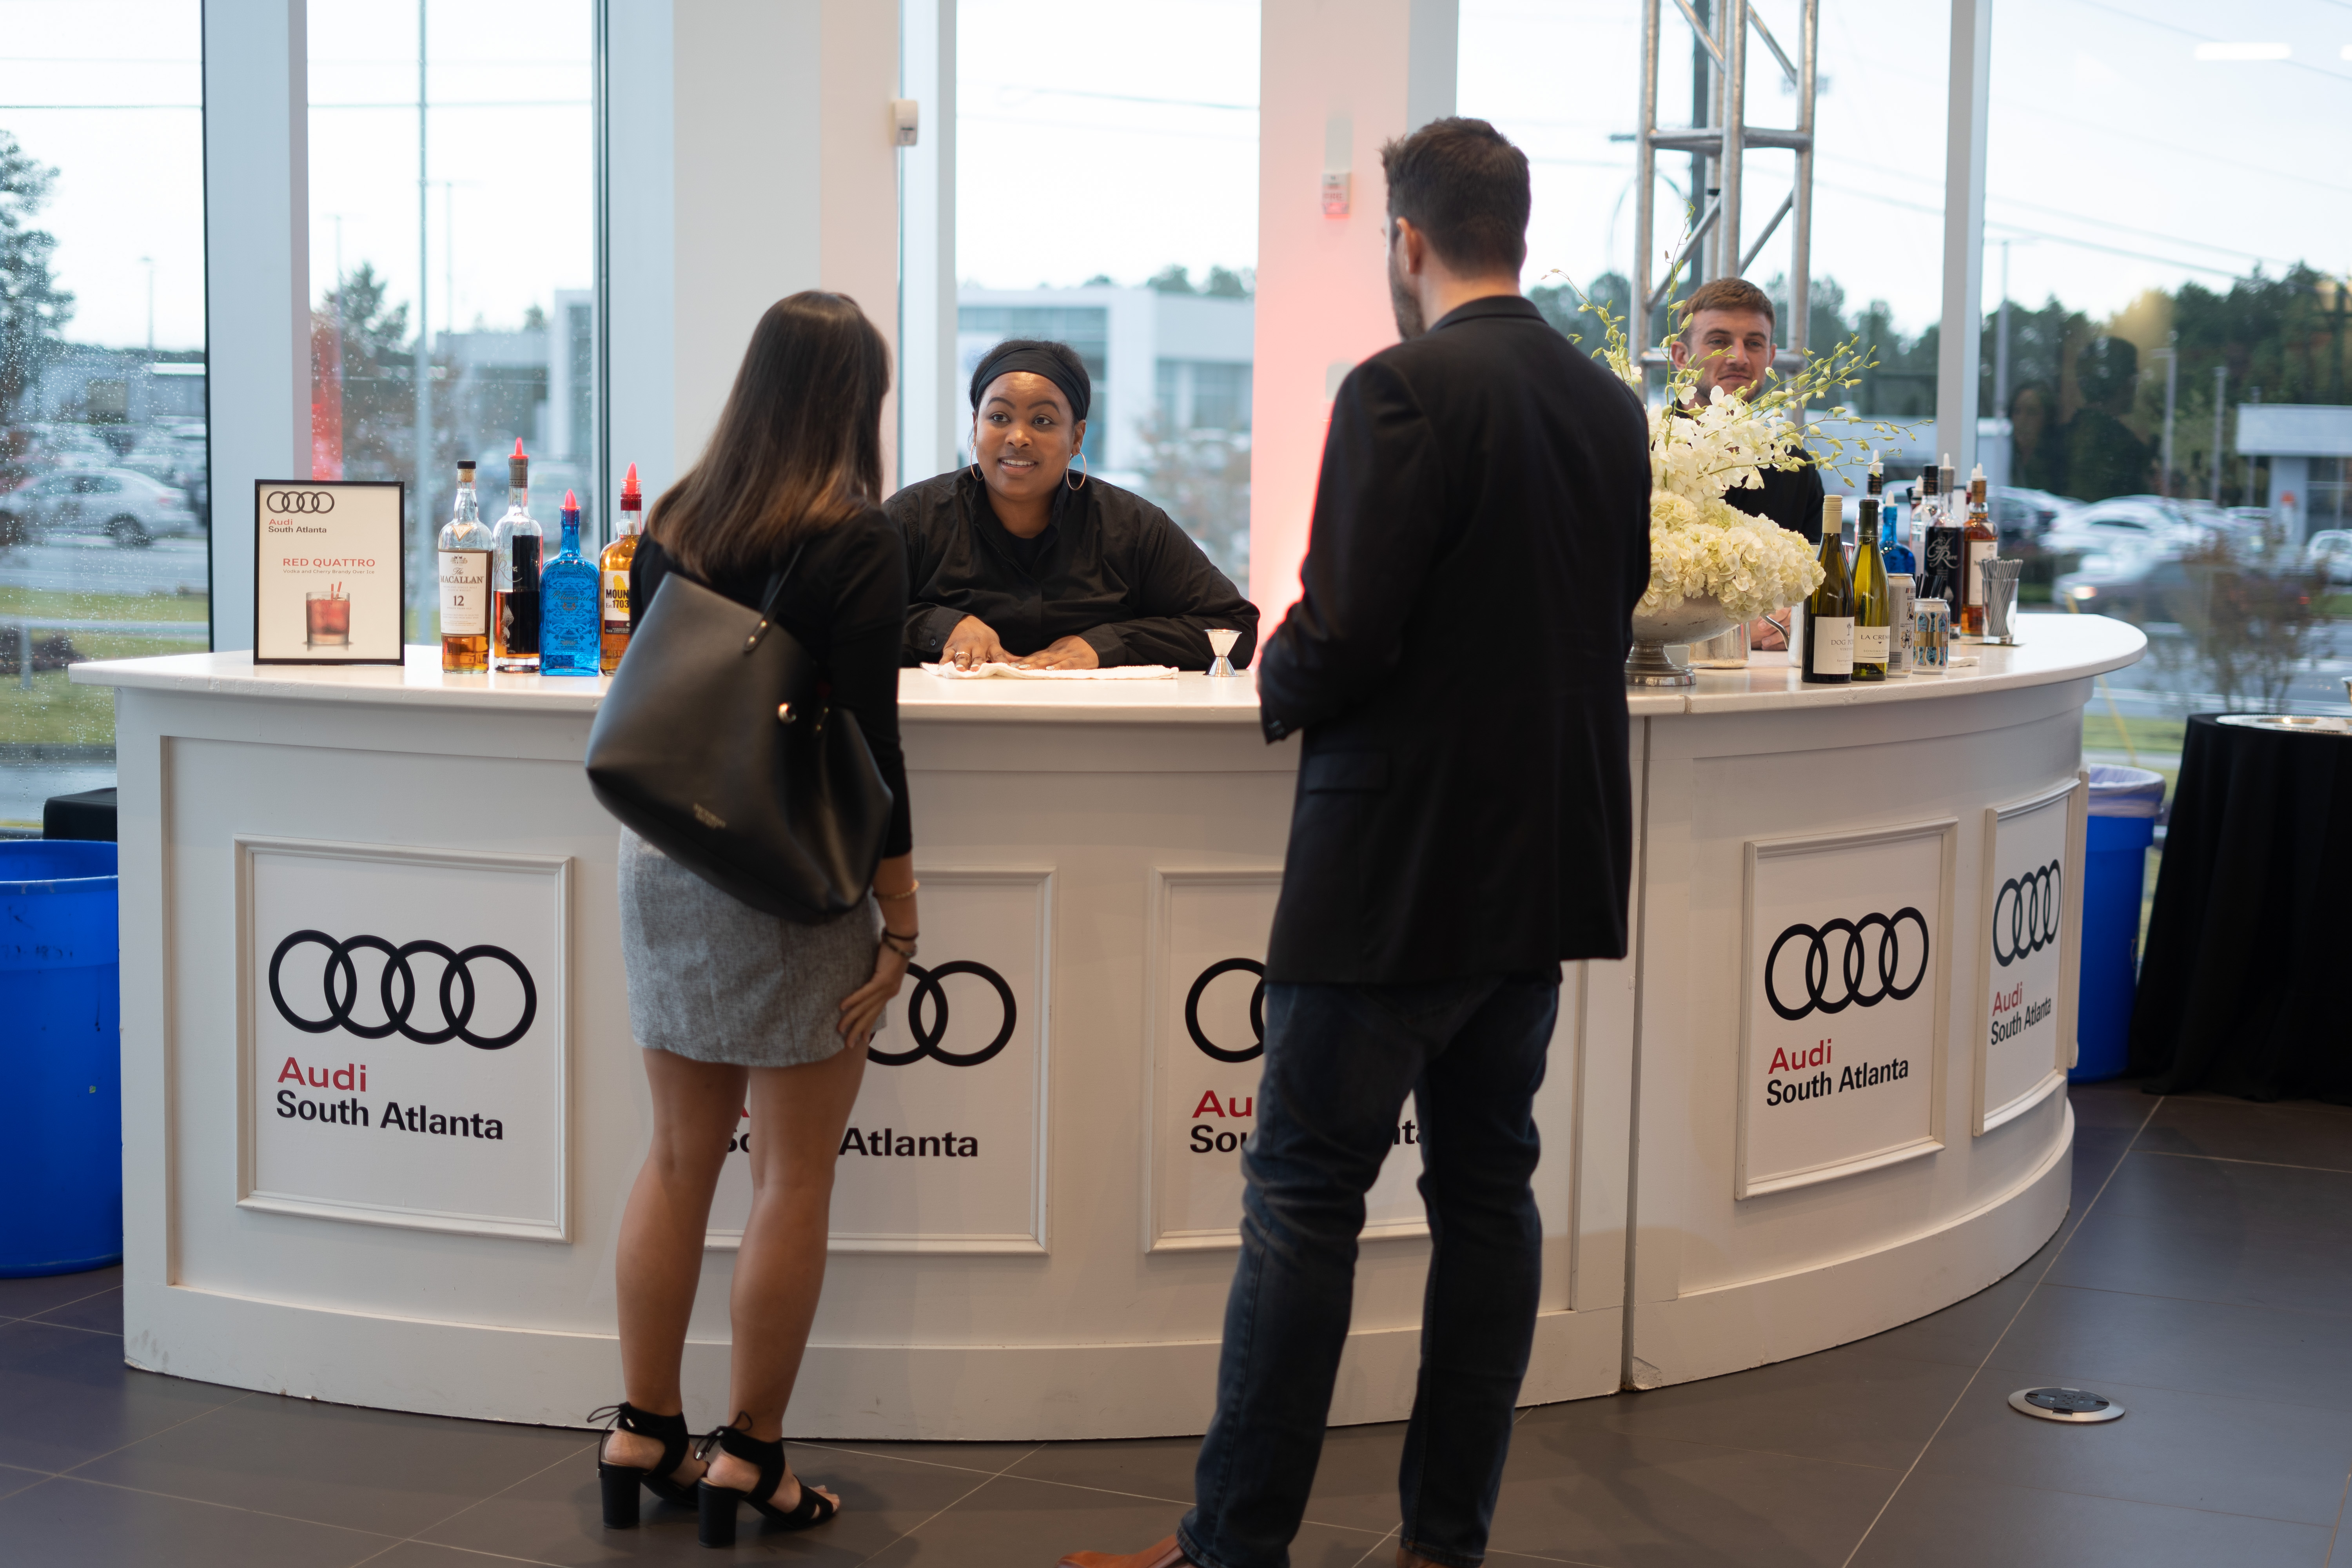 butler auto group of south atlanta, audi, audi dealership, atlanta dealership, grand opening, atlanta grand opening, wm event,s event planning, event planner, event design, event designer, event consultant, event consulting, event management, affairs to remember, social events, corporate events